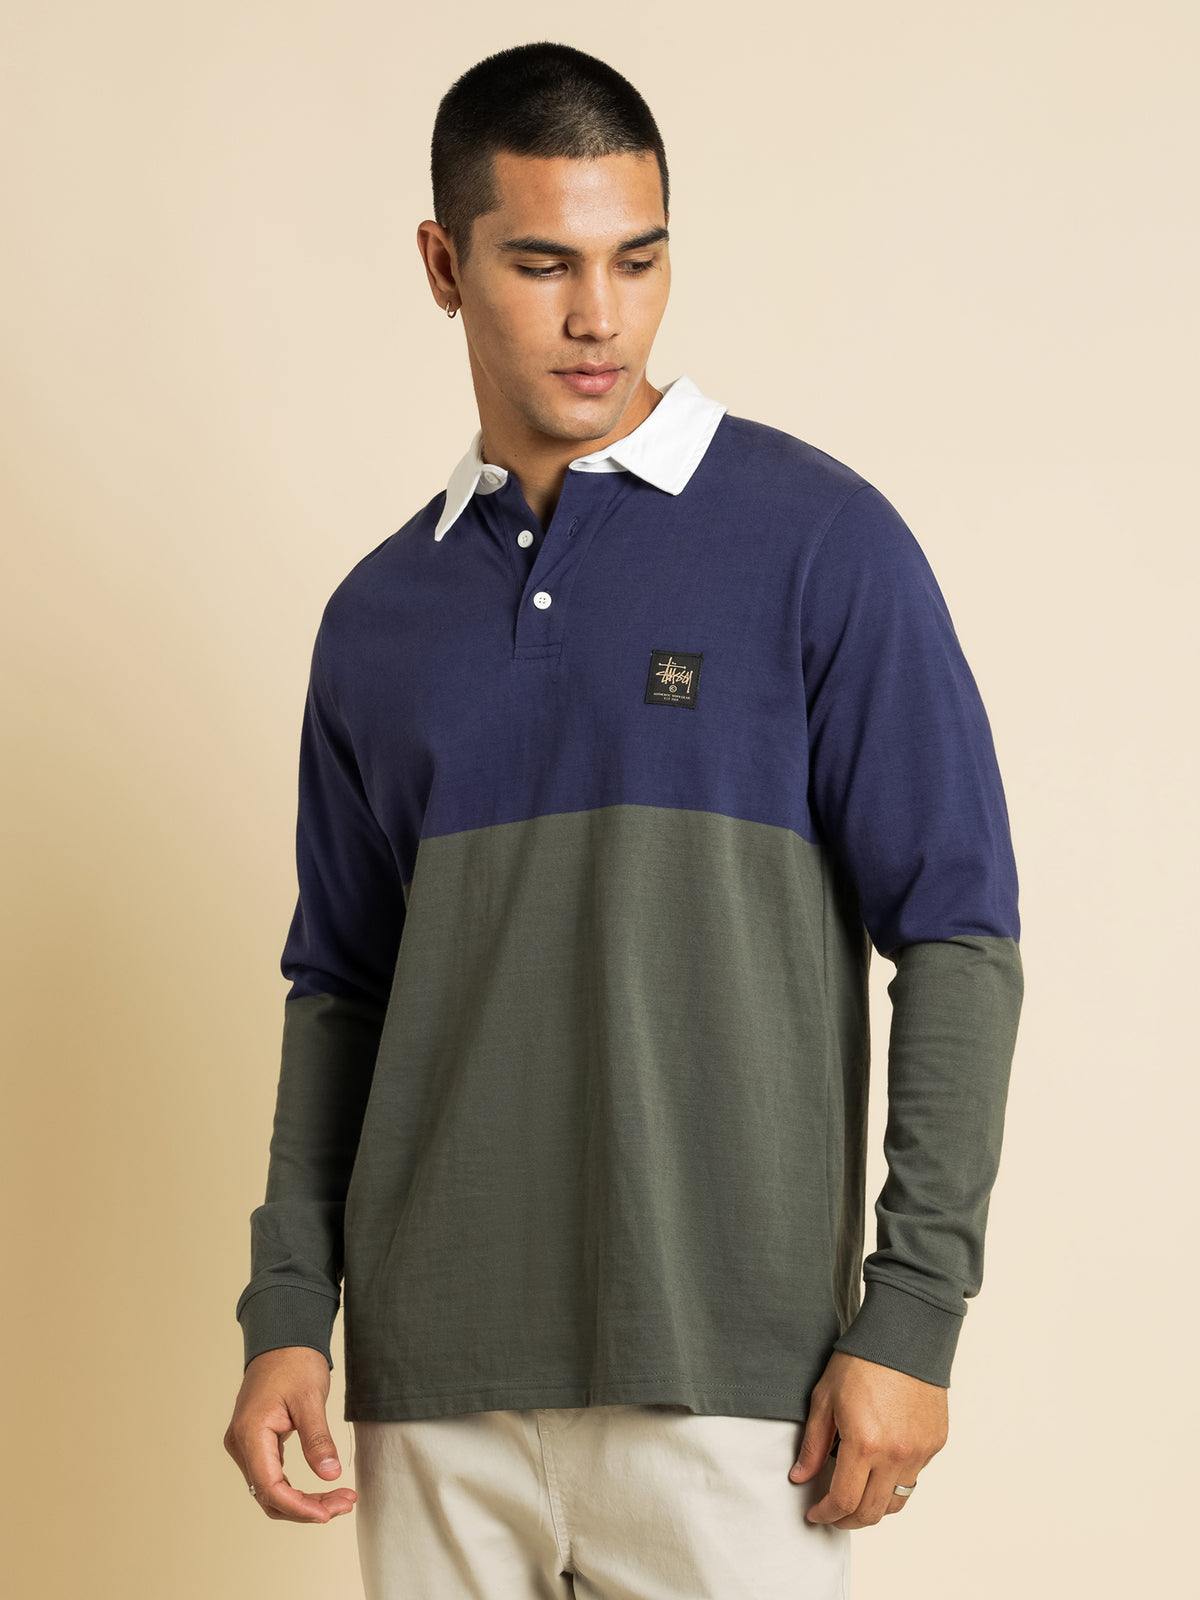 Twos Long Sleeve Rugby Jersey in Navy &amp; Flight Green